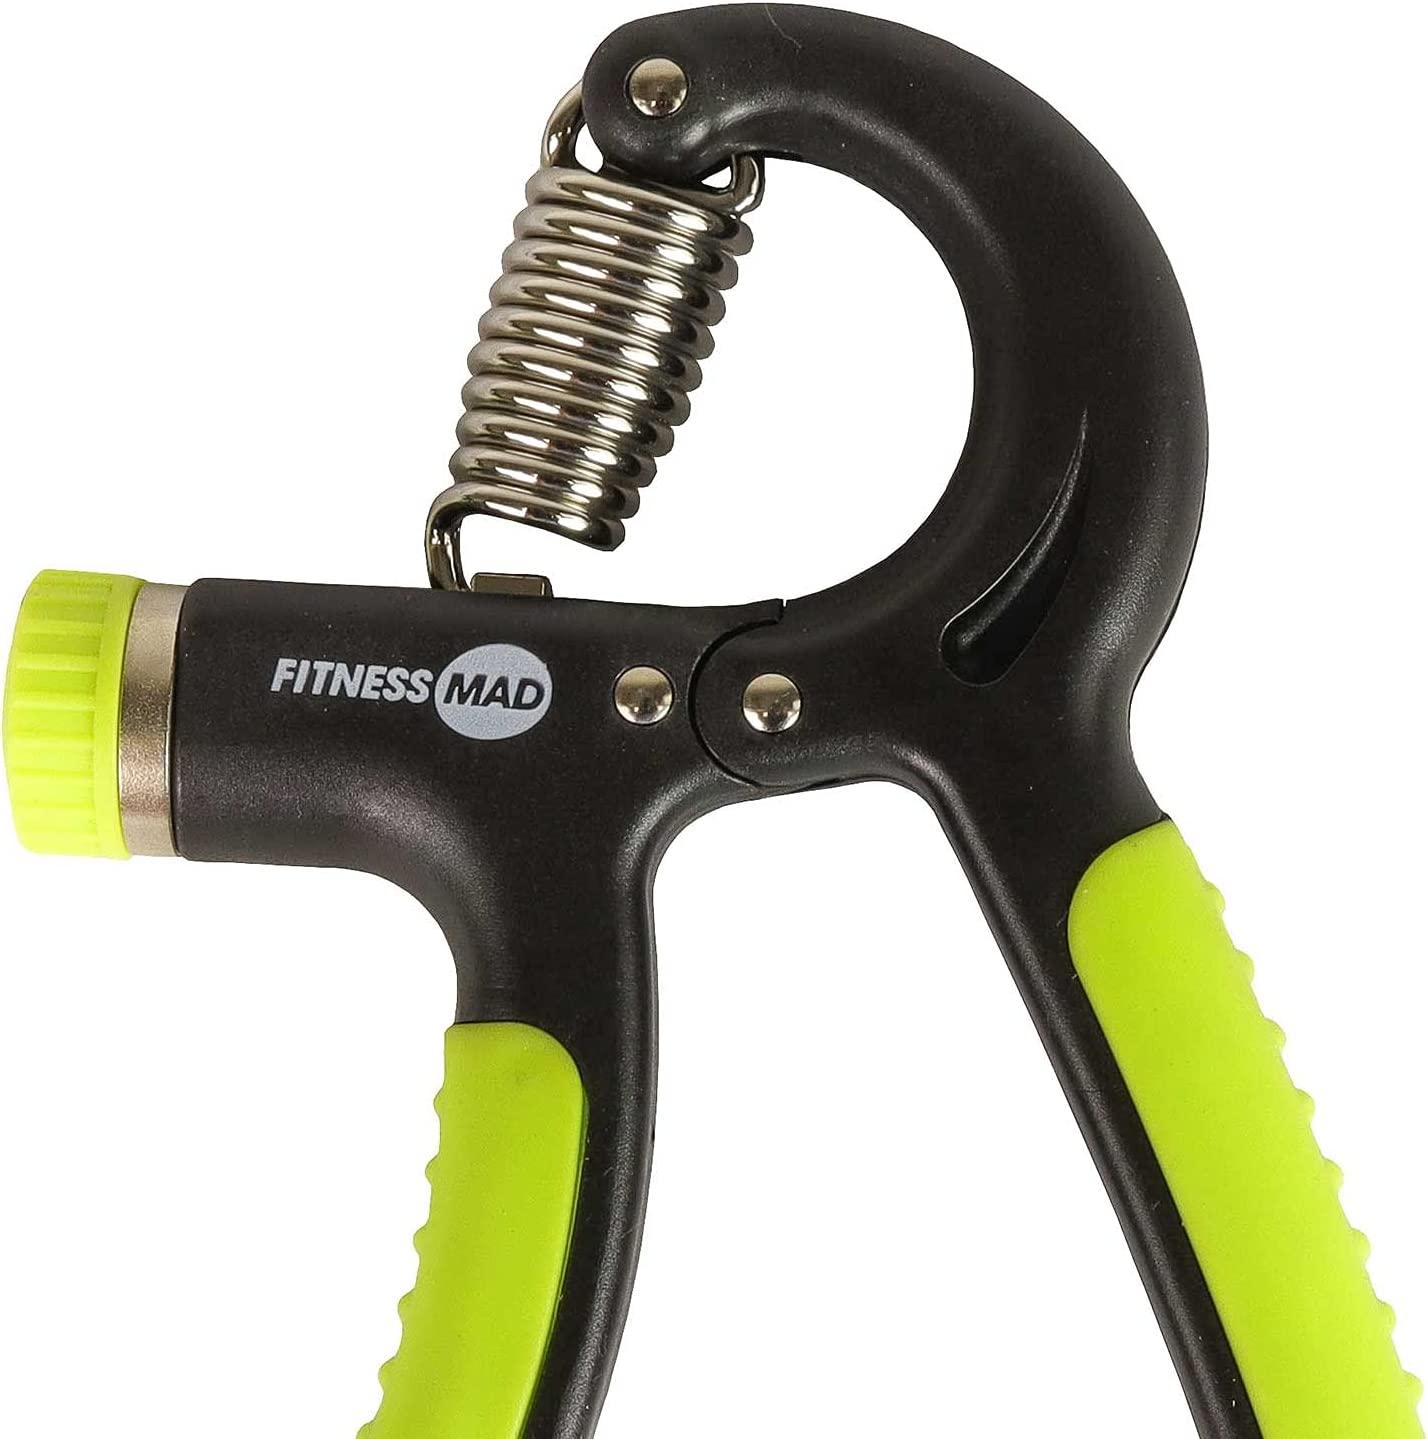 Fitness Mad 10-30KG Hand Exerciser - RINGMASTER SPORTS - Made For Champions